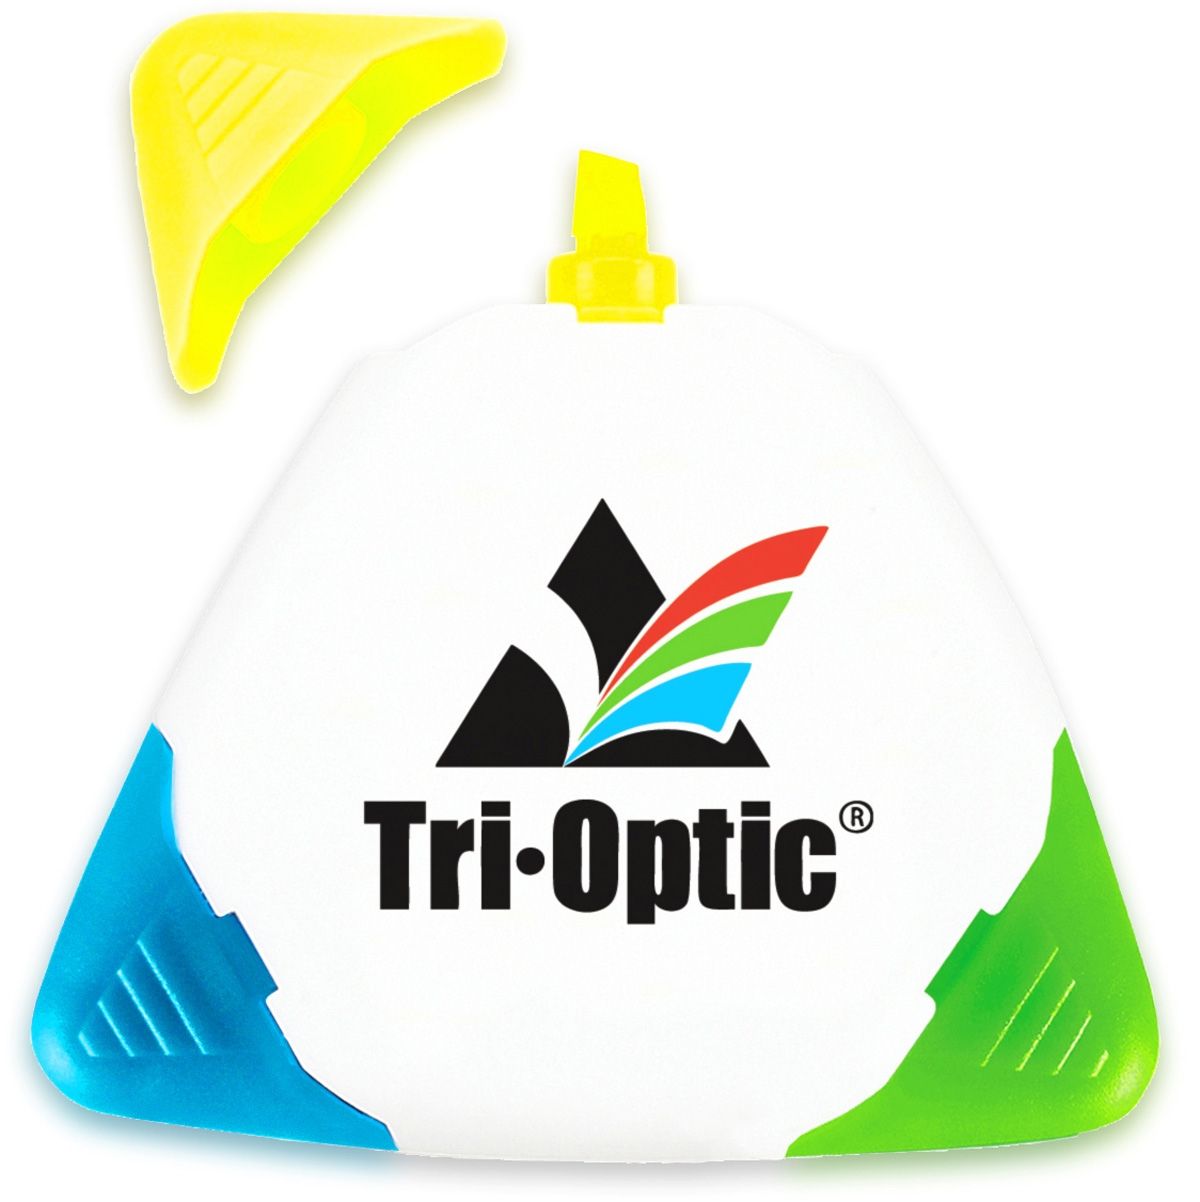 3-in-1 Triangular Promotional Highlighter